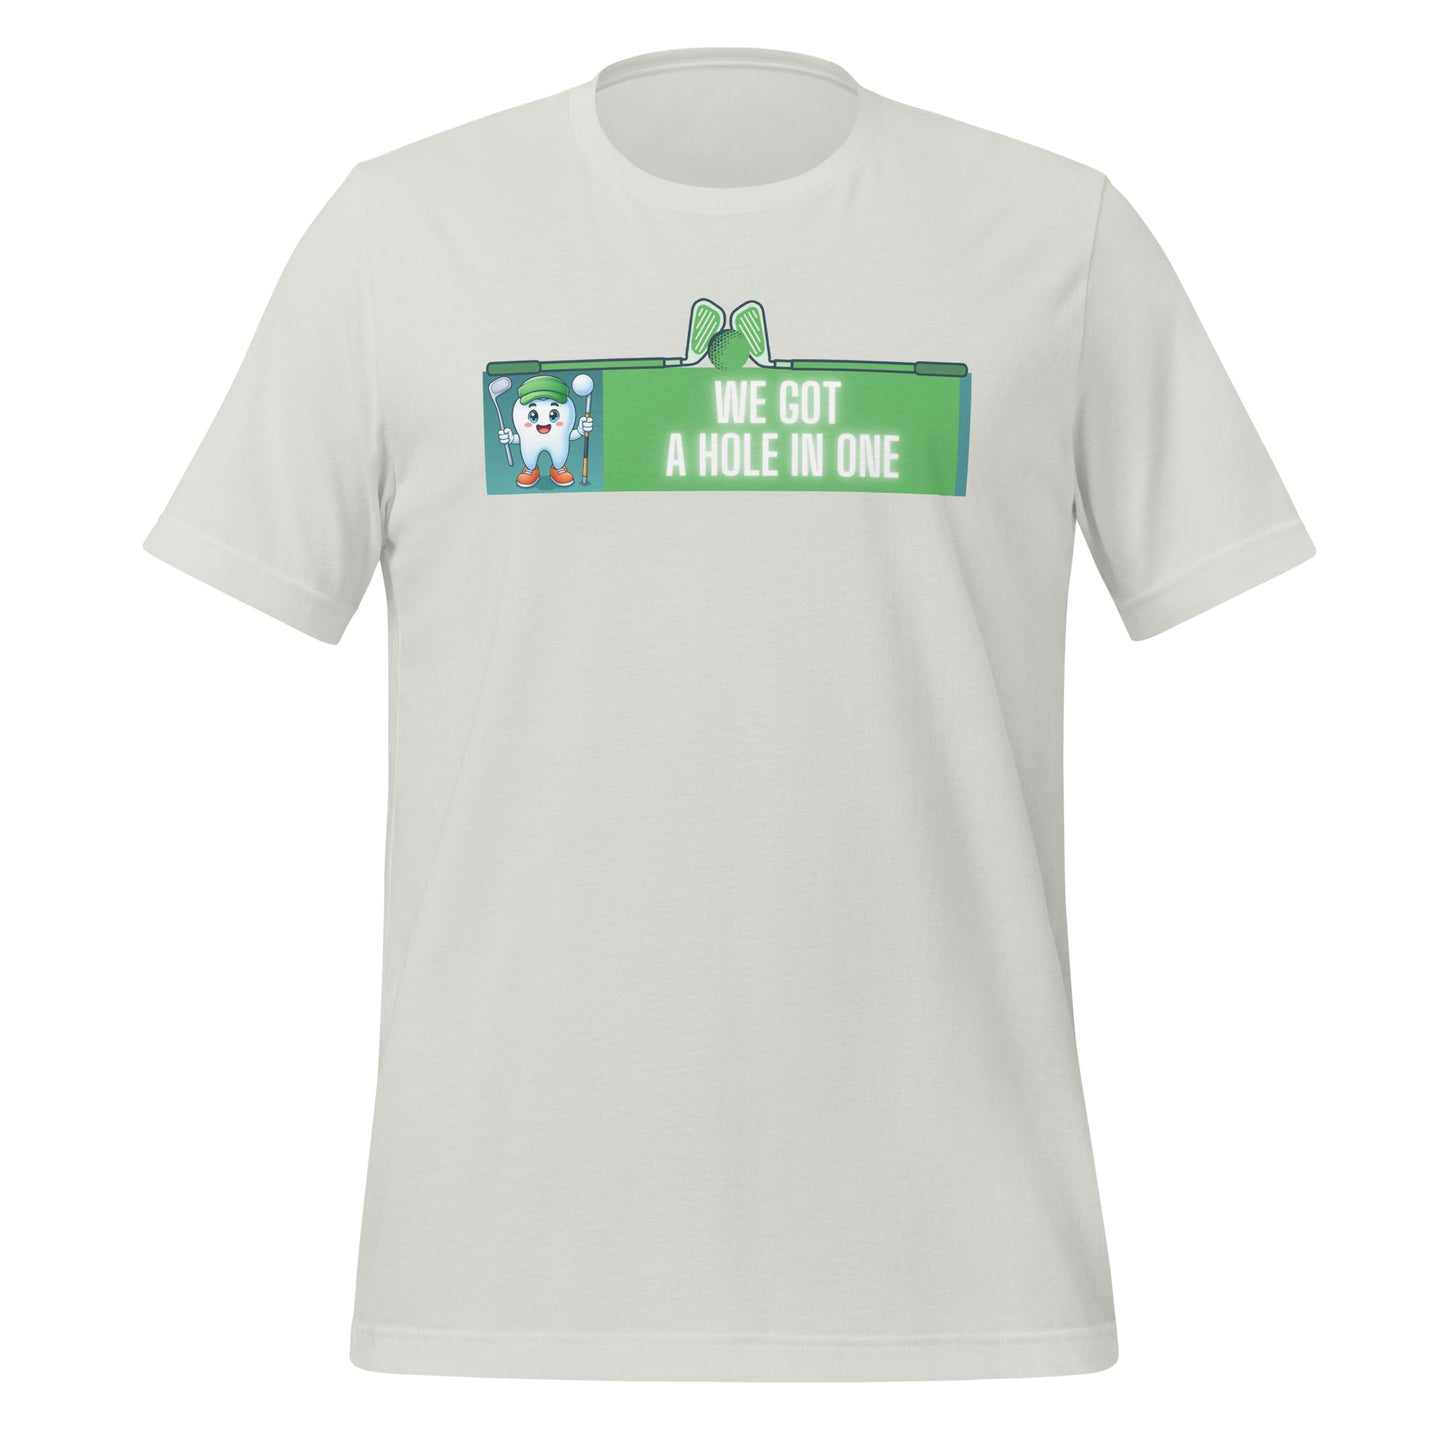 Cute dentist t-shirt showcasing an adorable tooth character in golf attire, joyfully celebrating a ‘hole in one’ achievement, perfect for dentist and dental professionals seeking unique and thematic dental apparel. Silver color, front view.